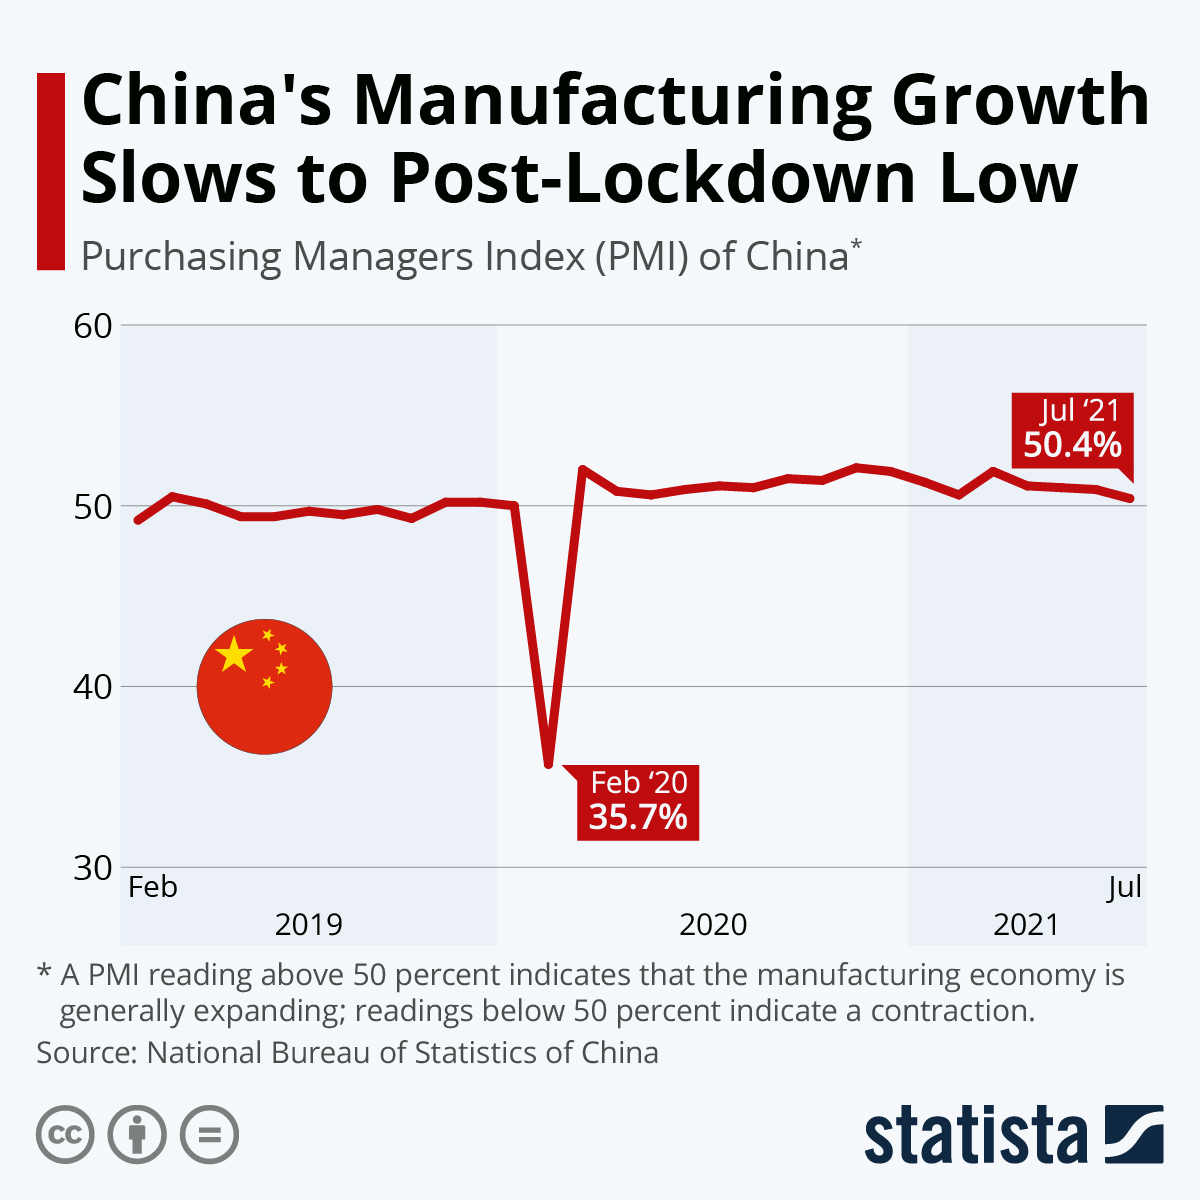 China's Manufacturing Growth Slows to Post-Lockdown Low